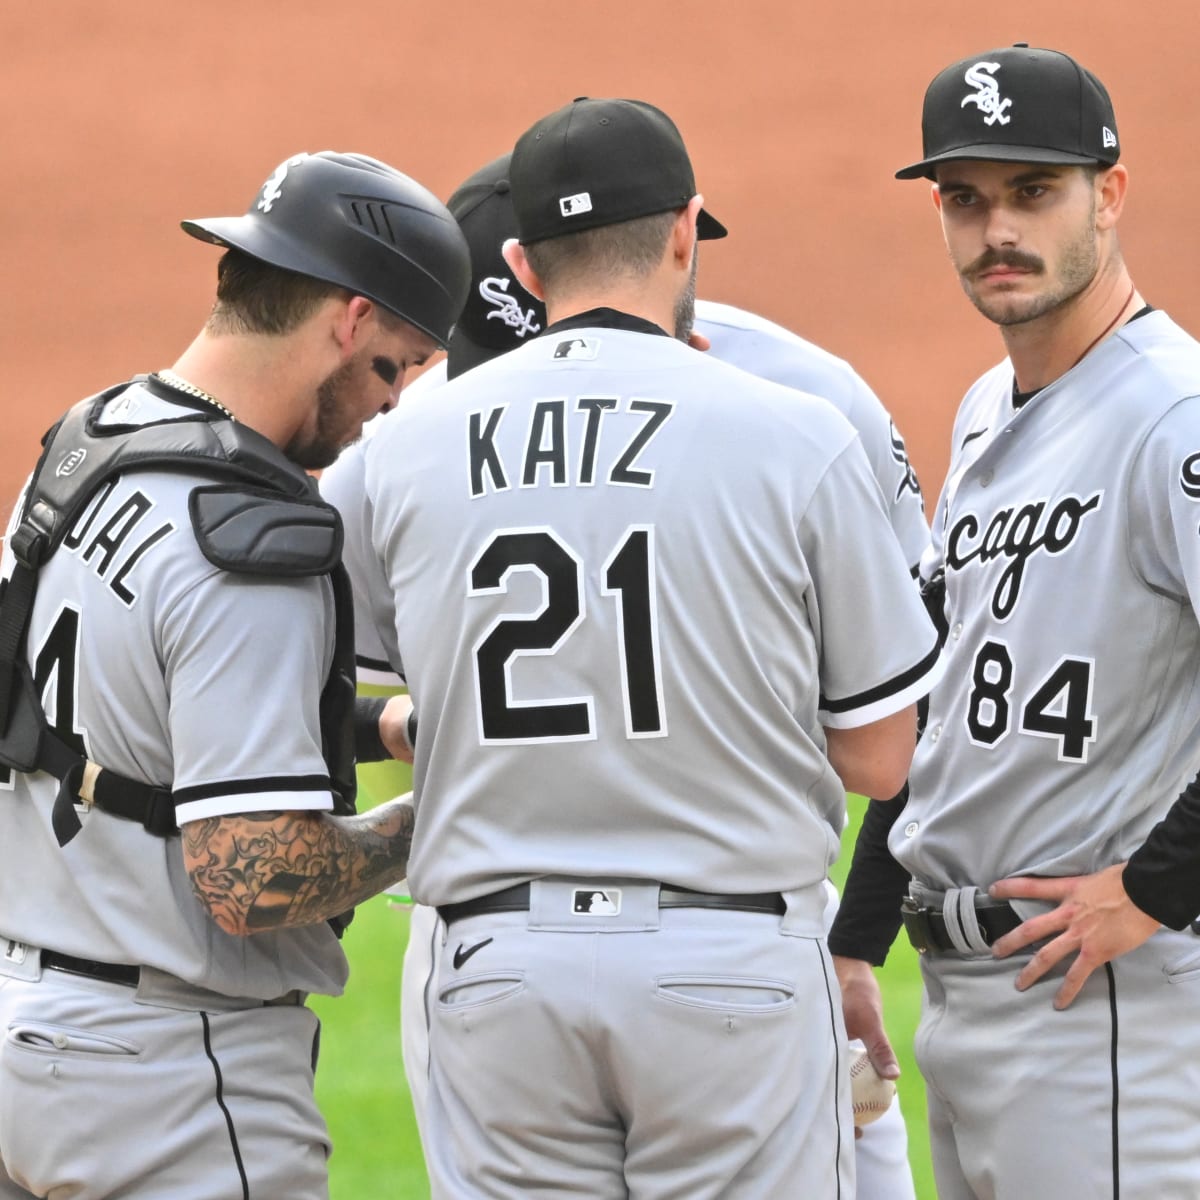 An Impressive Stat About the Performance of Chicago White Sox Star